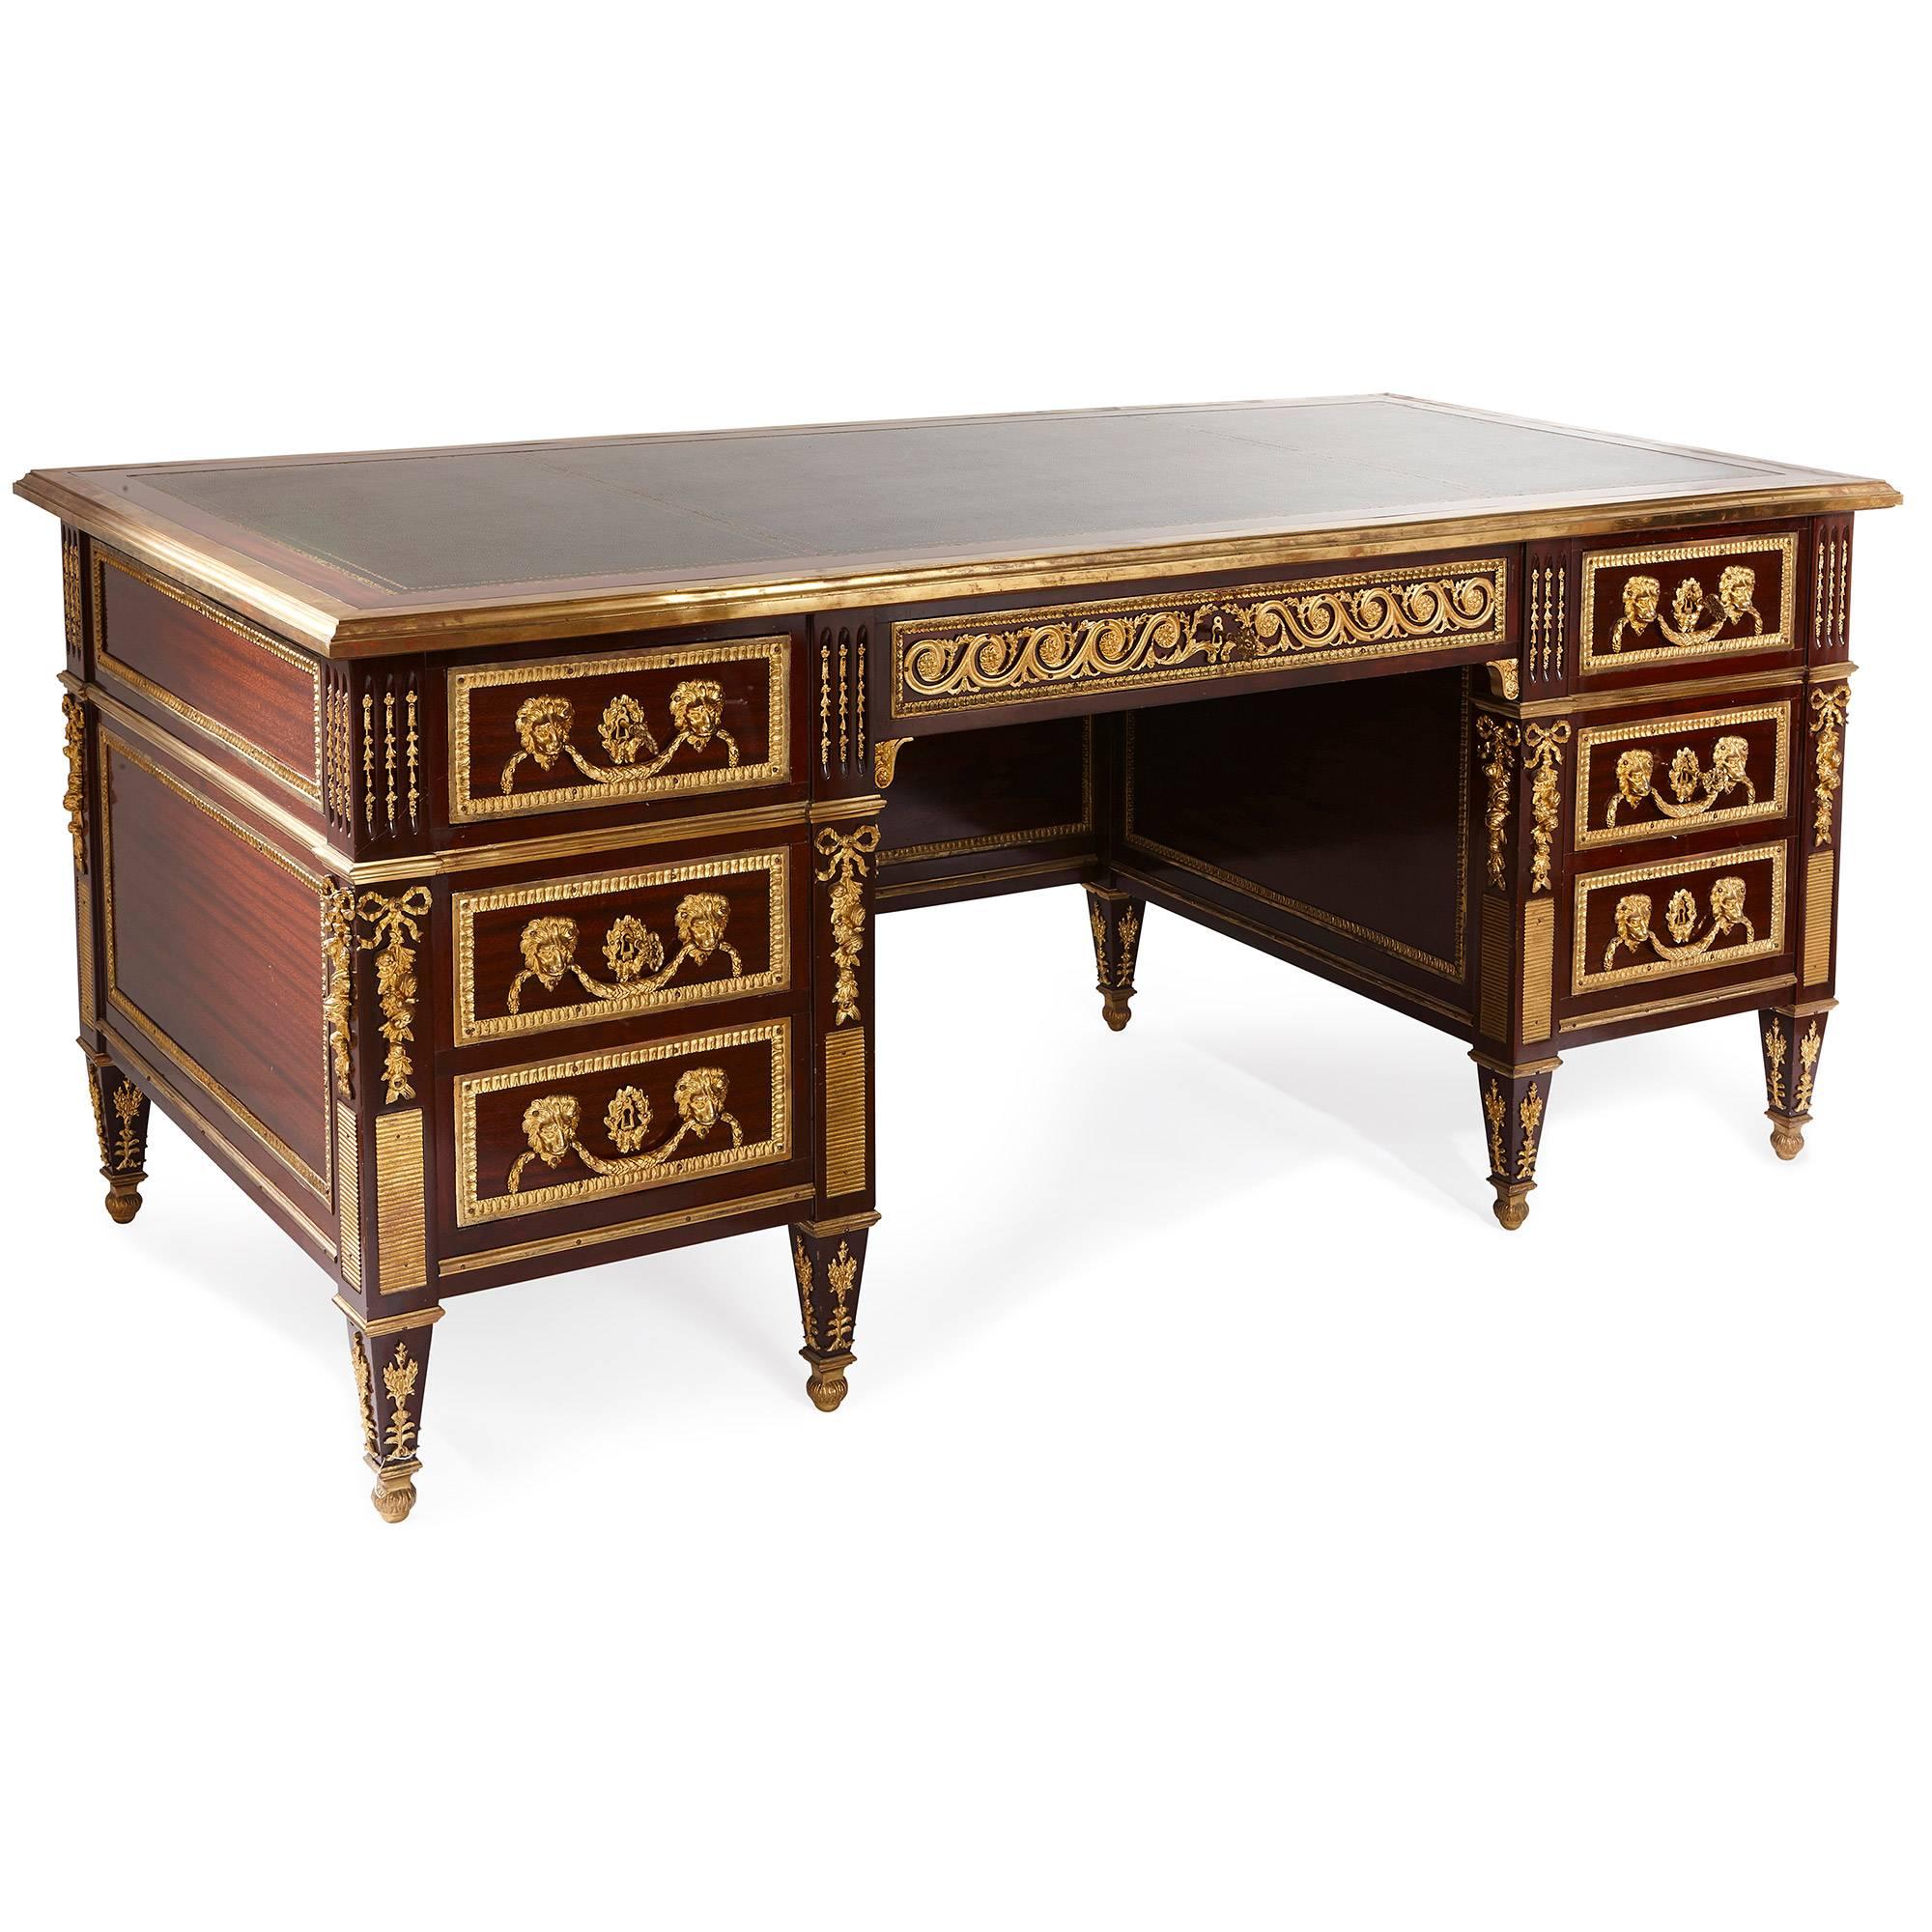 Built from mahogany, topped with leather and mounted with gilt bronze, this splendid Louis XVI style writing desk exudes neoclassical elegance and will add a sumptuous, grand touch to a traditional antique interior. The desk is rectangular in form